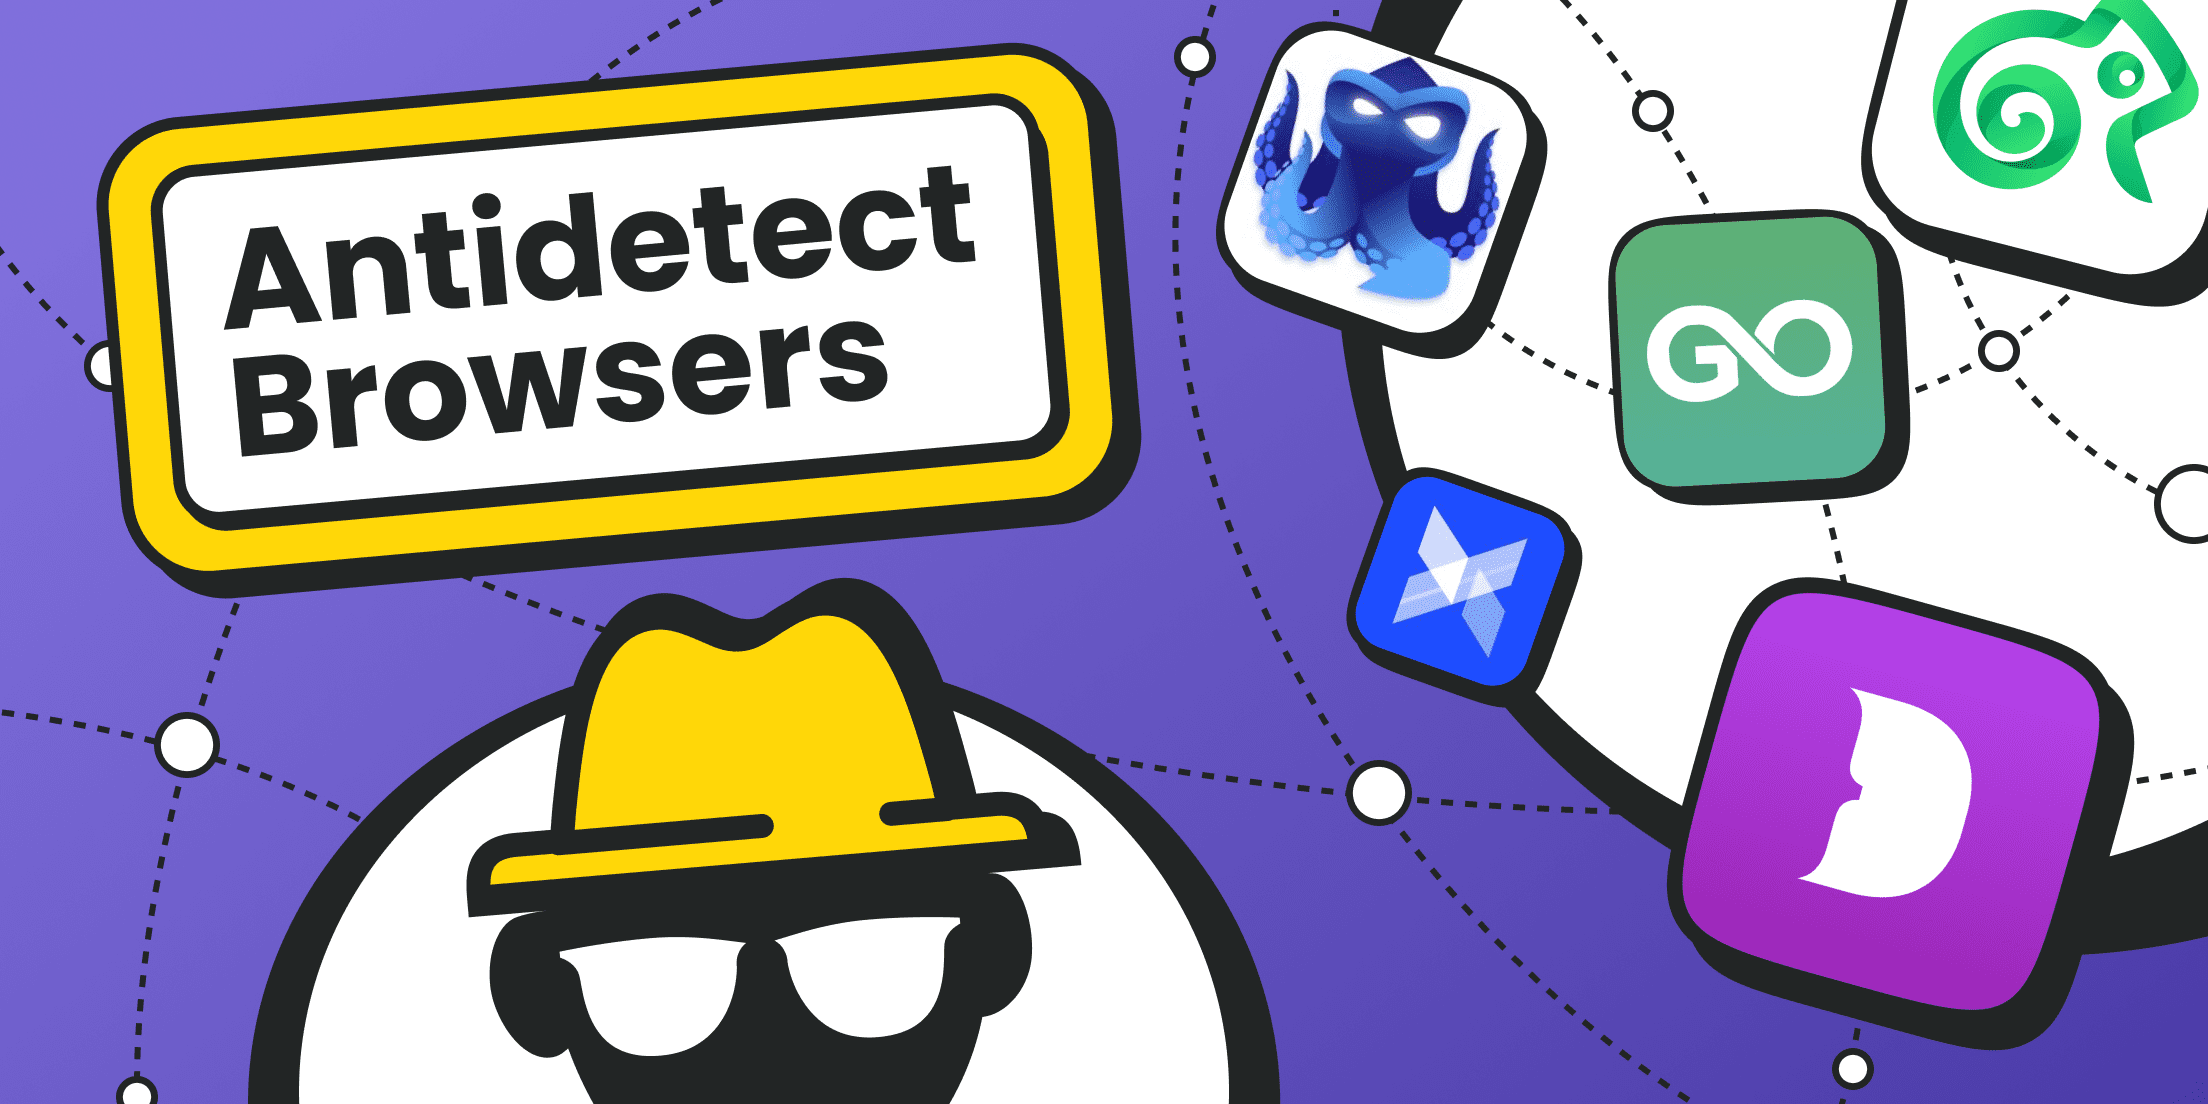 Antidetect Browsers overview